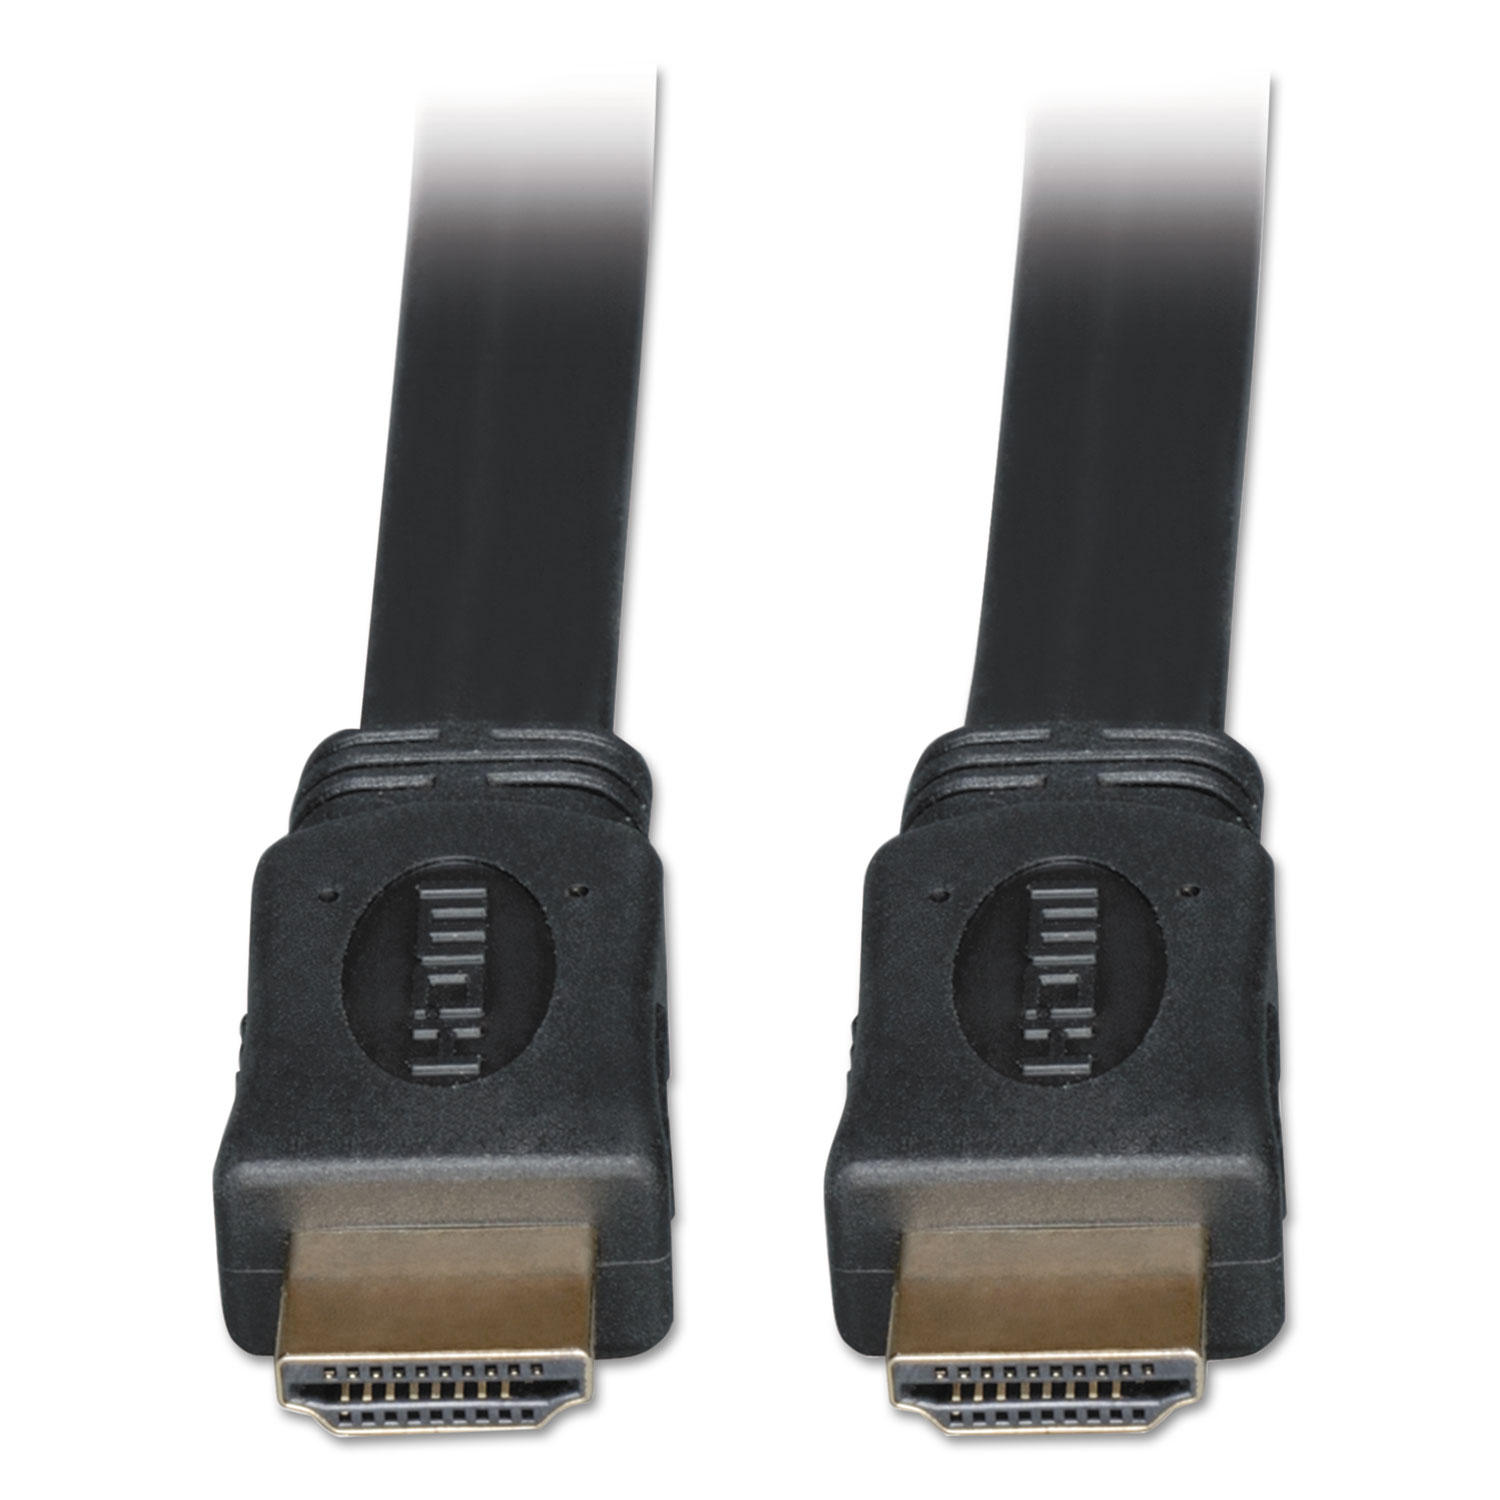 P568-006-FL 6ft Flat HDMI Gold Cable HDMI M/M, 6